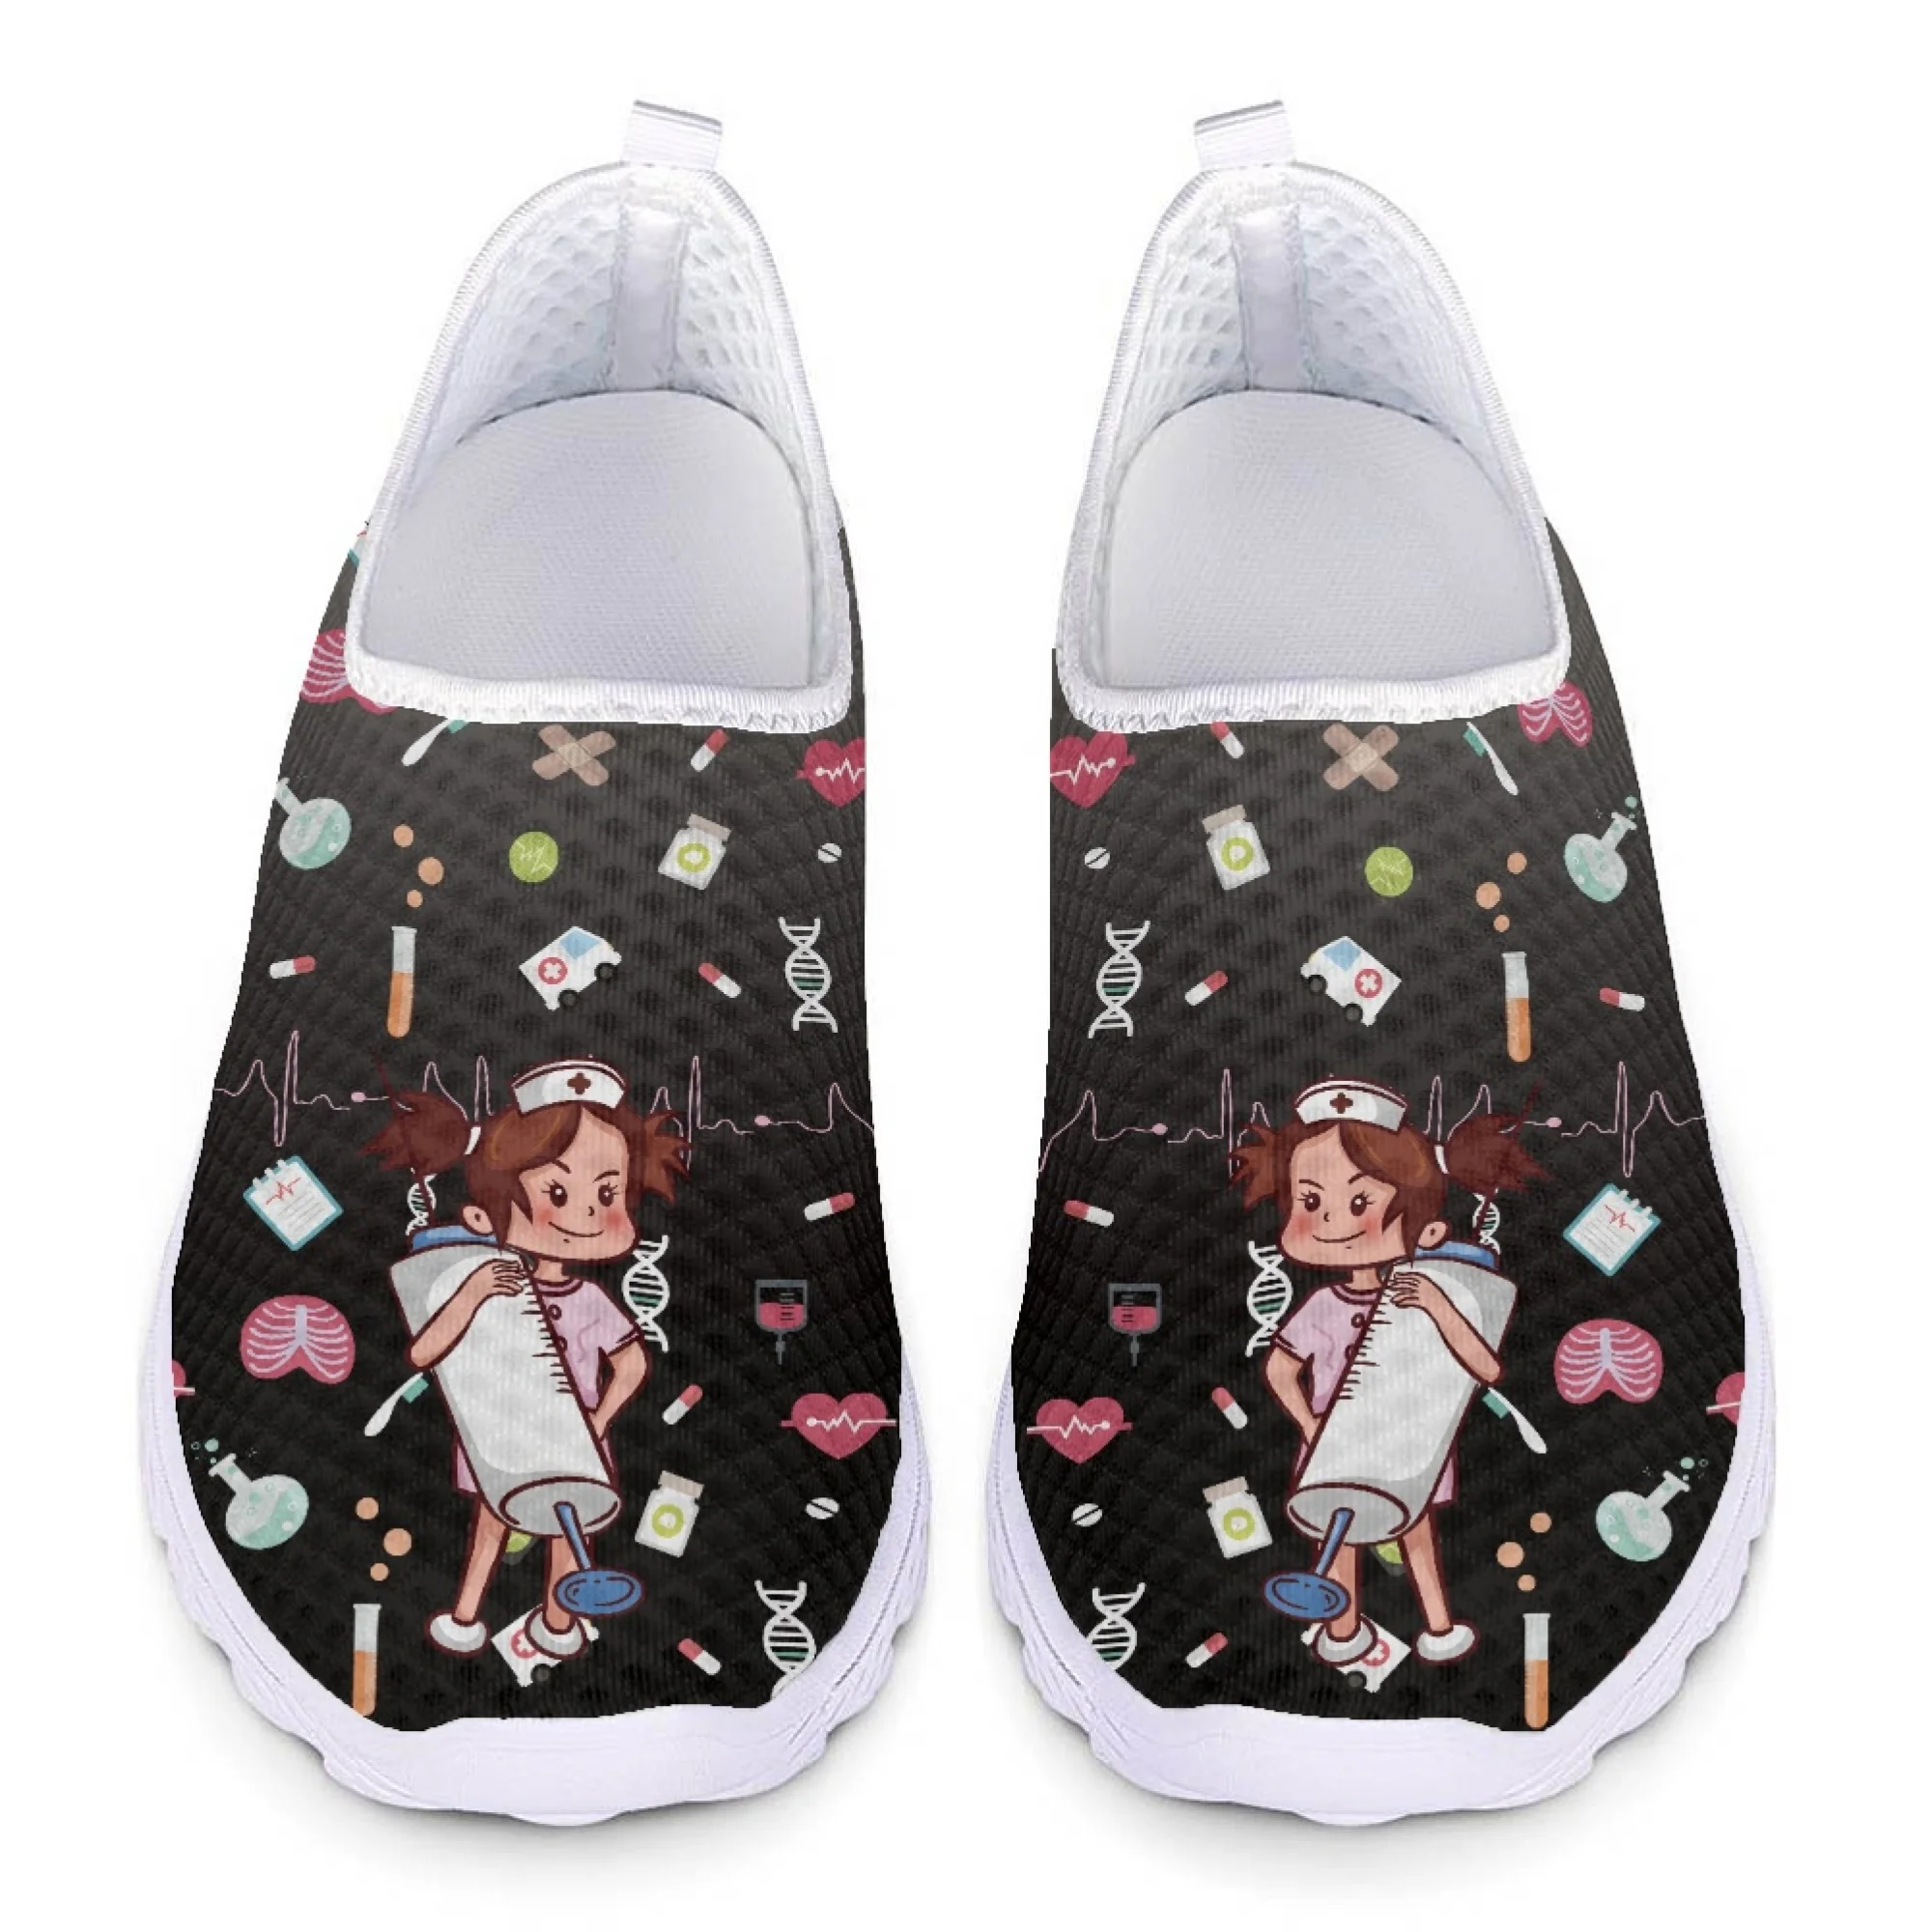 

Yikeluo New Cartoon Nurse Print Women Sneakers Slip On Lightweight Mesh Shoes Summer Breathable Flats Shoes Zapatos planos